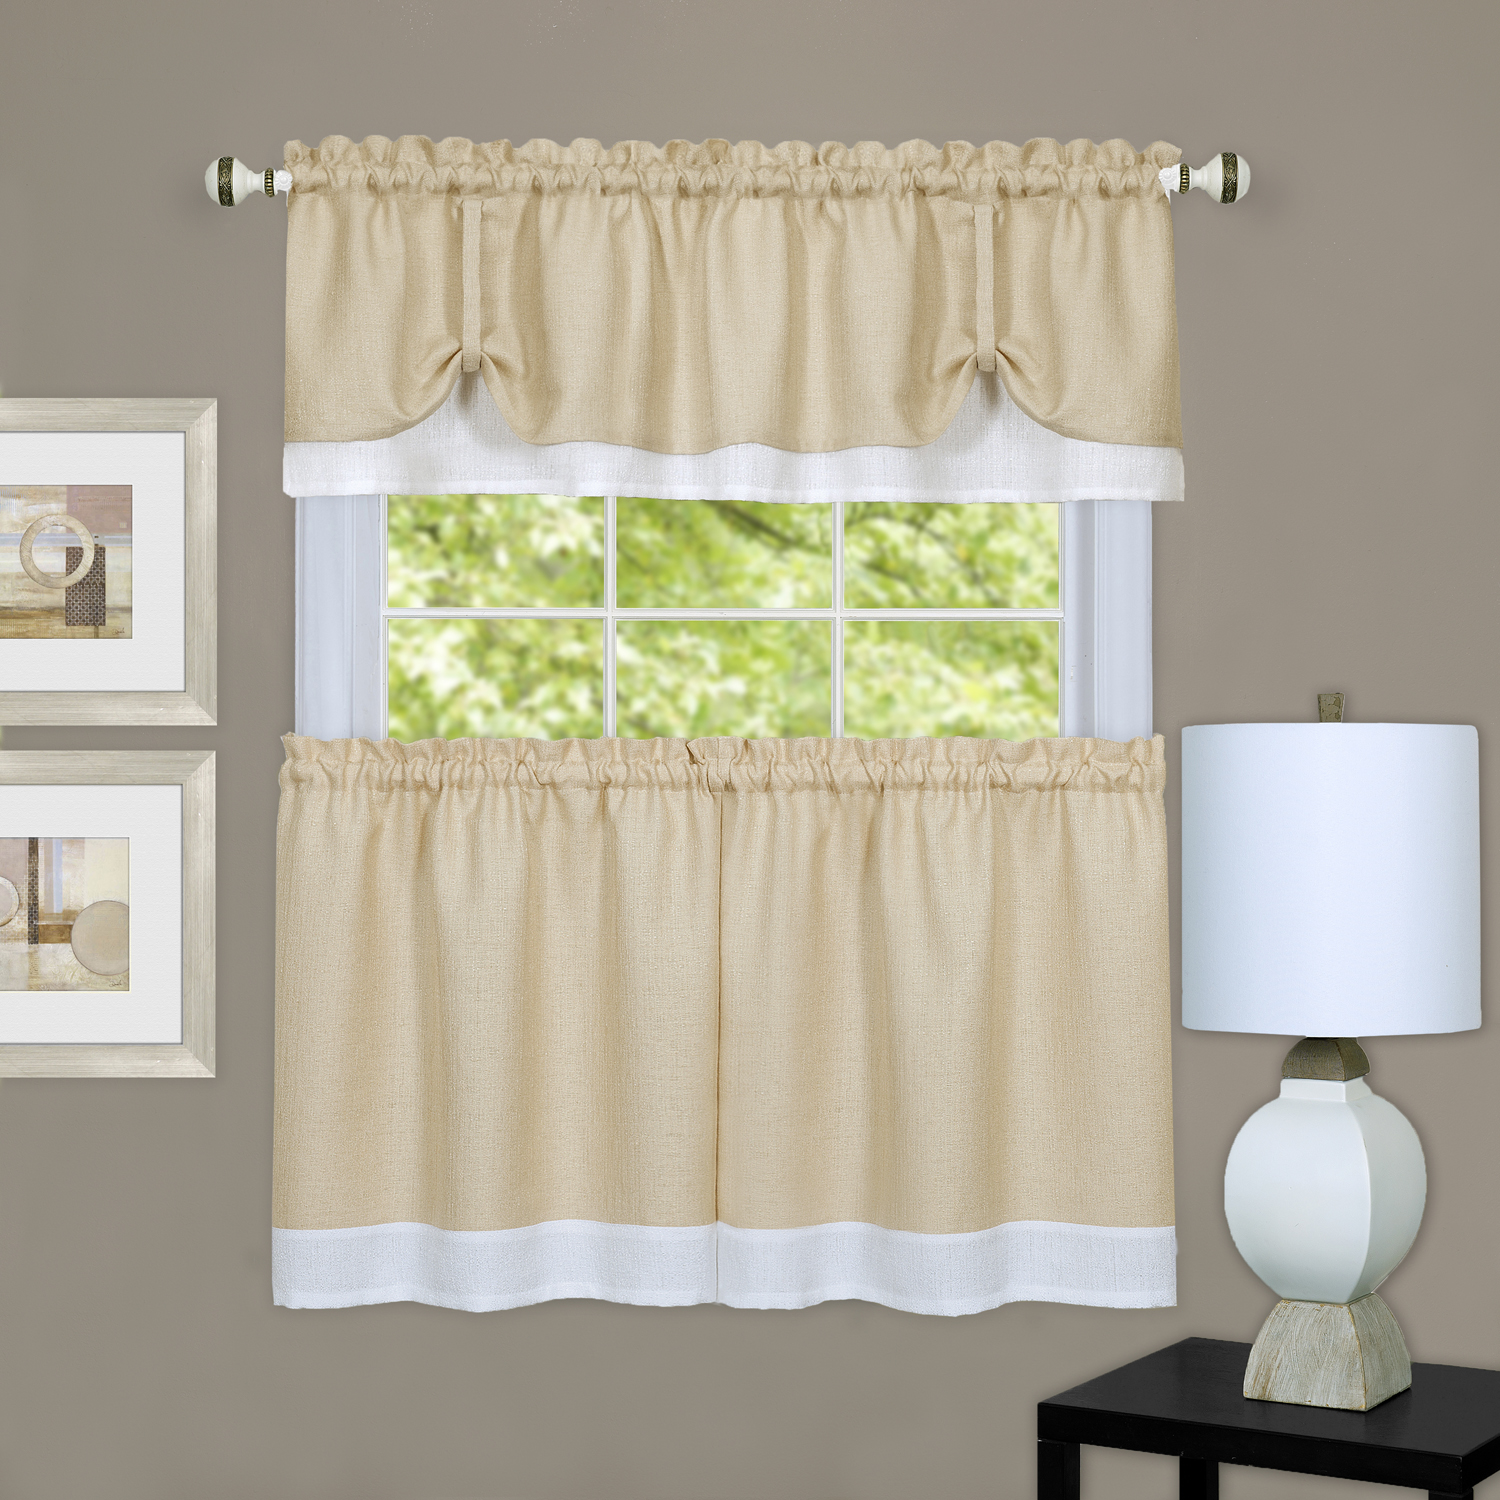 Achim Importing Co. Darcy Tier and Valance Set